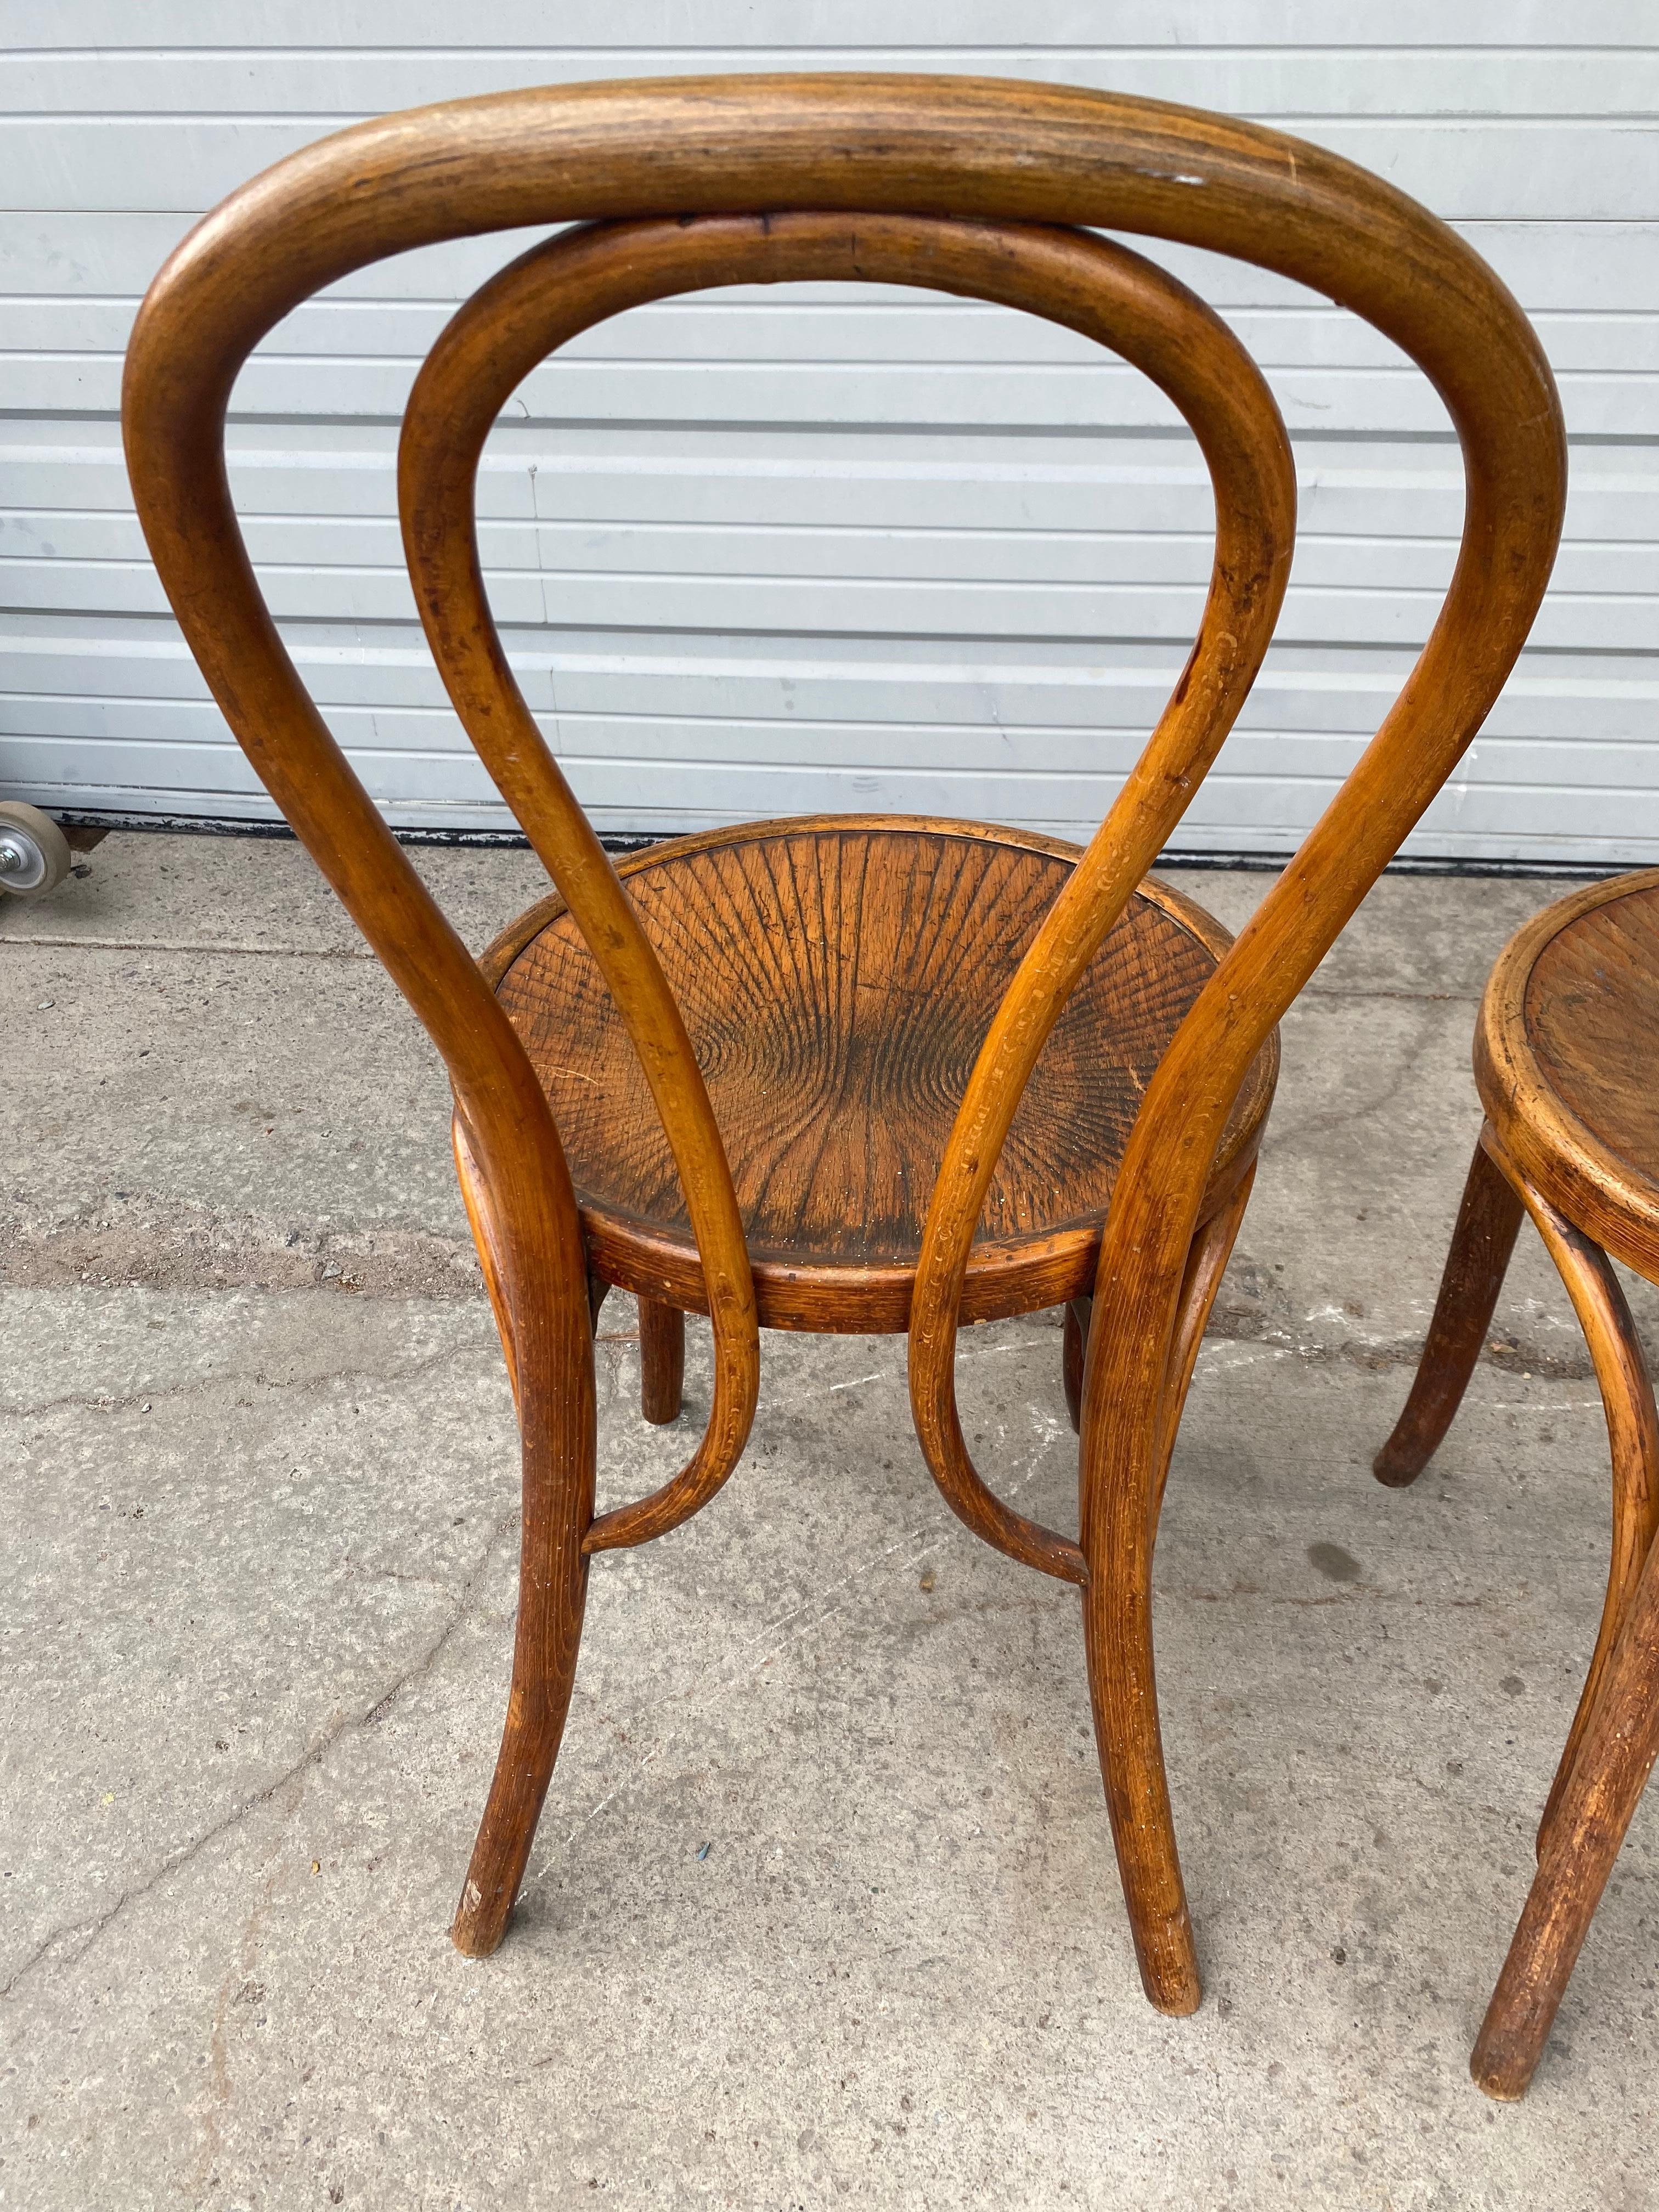 Pair early bentwood chairs, J J Kohn. Mundus, Retain original labels. Fourty years in the antique business, I have never seen this back configuration (note how bentwood goes beyond seat and attaches to rear legs). Rare find.